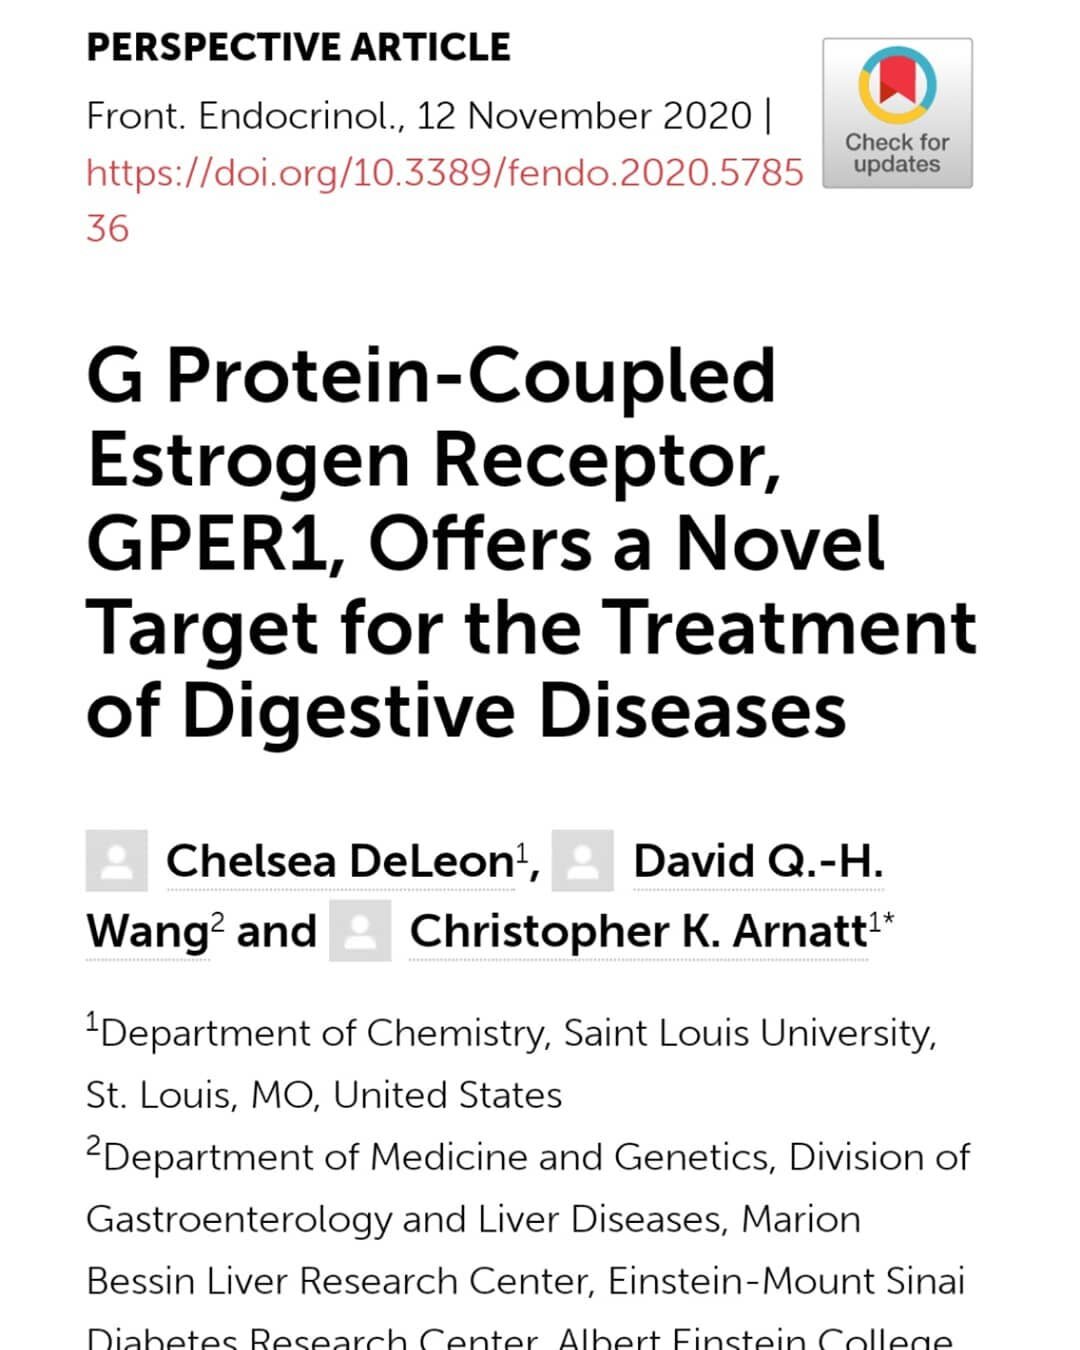 Check out our new review article about the G Protien-Coupled Estrogen Receptor, GPER, and its potential for the treatment of gallstones. https://www.frontiersin.org/articles/10.3389/fendo.2020.578536/full  #estrogen #endocrinology #gallstones #SLU #m